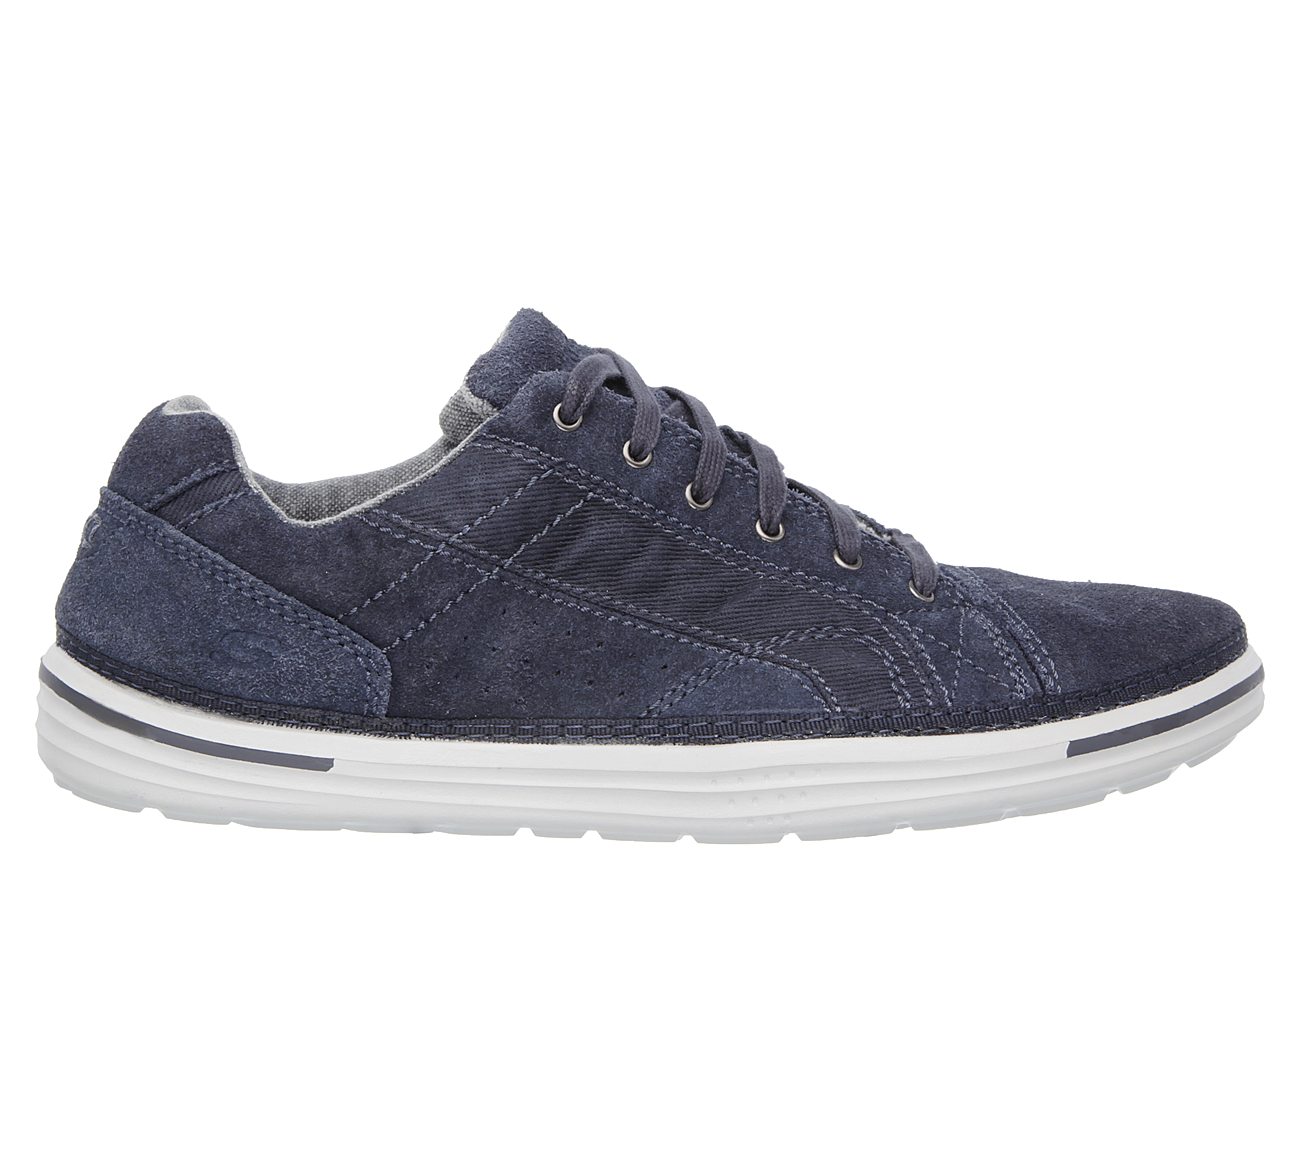 SKECHERS Relaxed Fit: Landen - Buford 